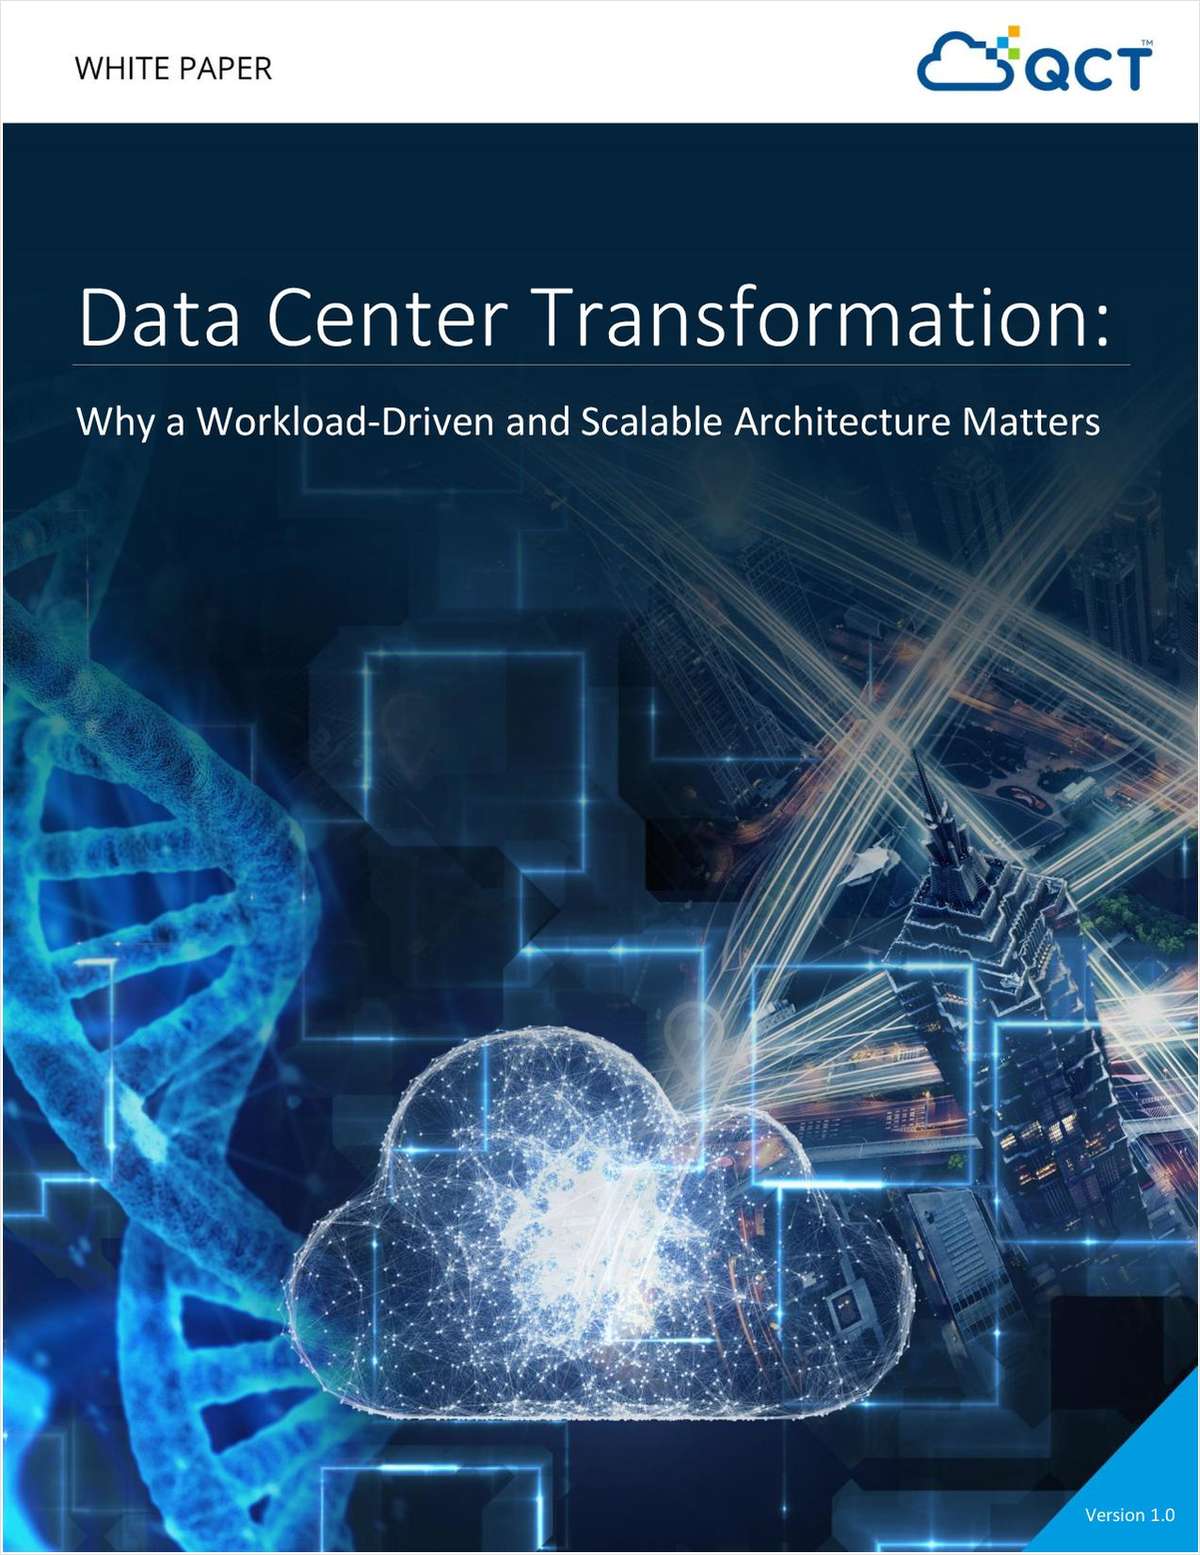 Data Center Transformation: Why a Workload-Driven and Scalable Architecture Matters